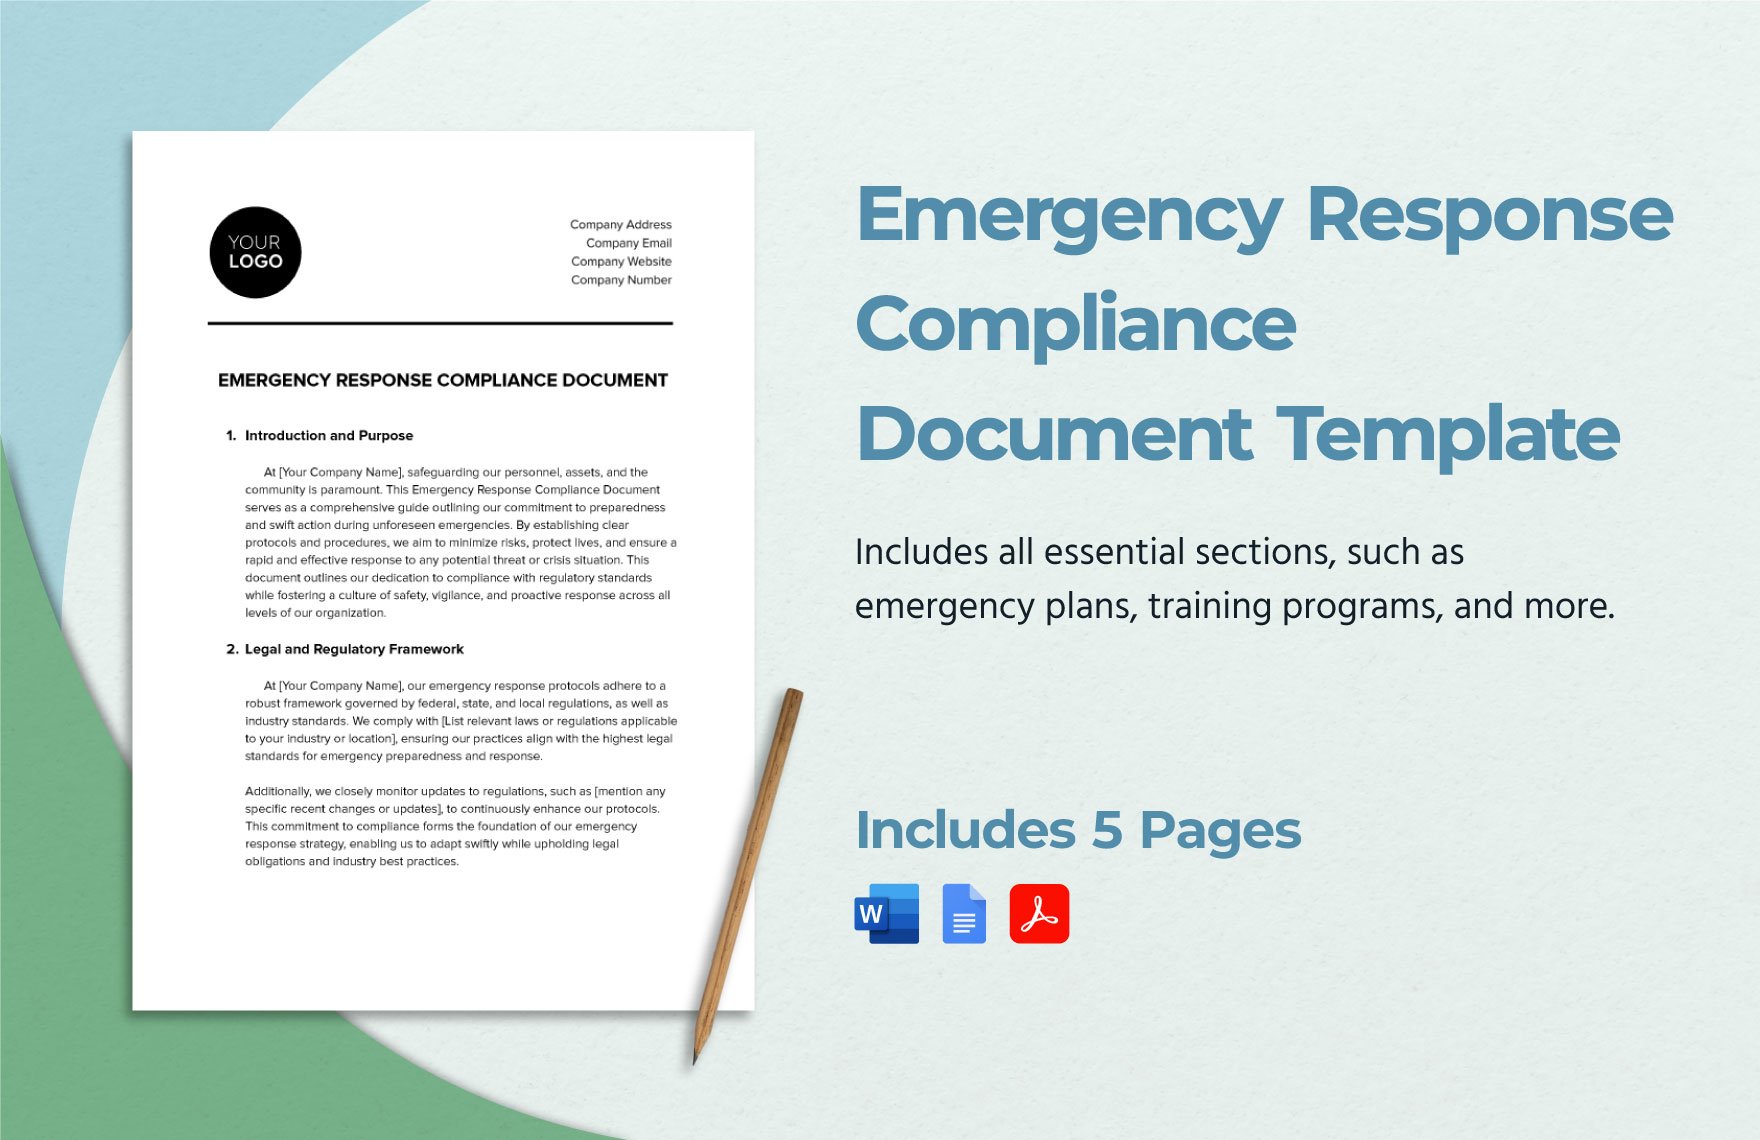 Emergency Response Compliance Document Template